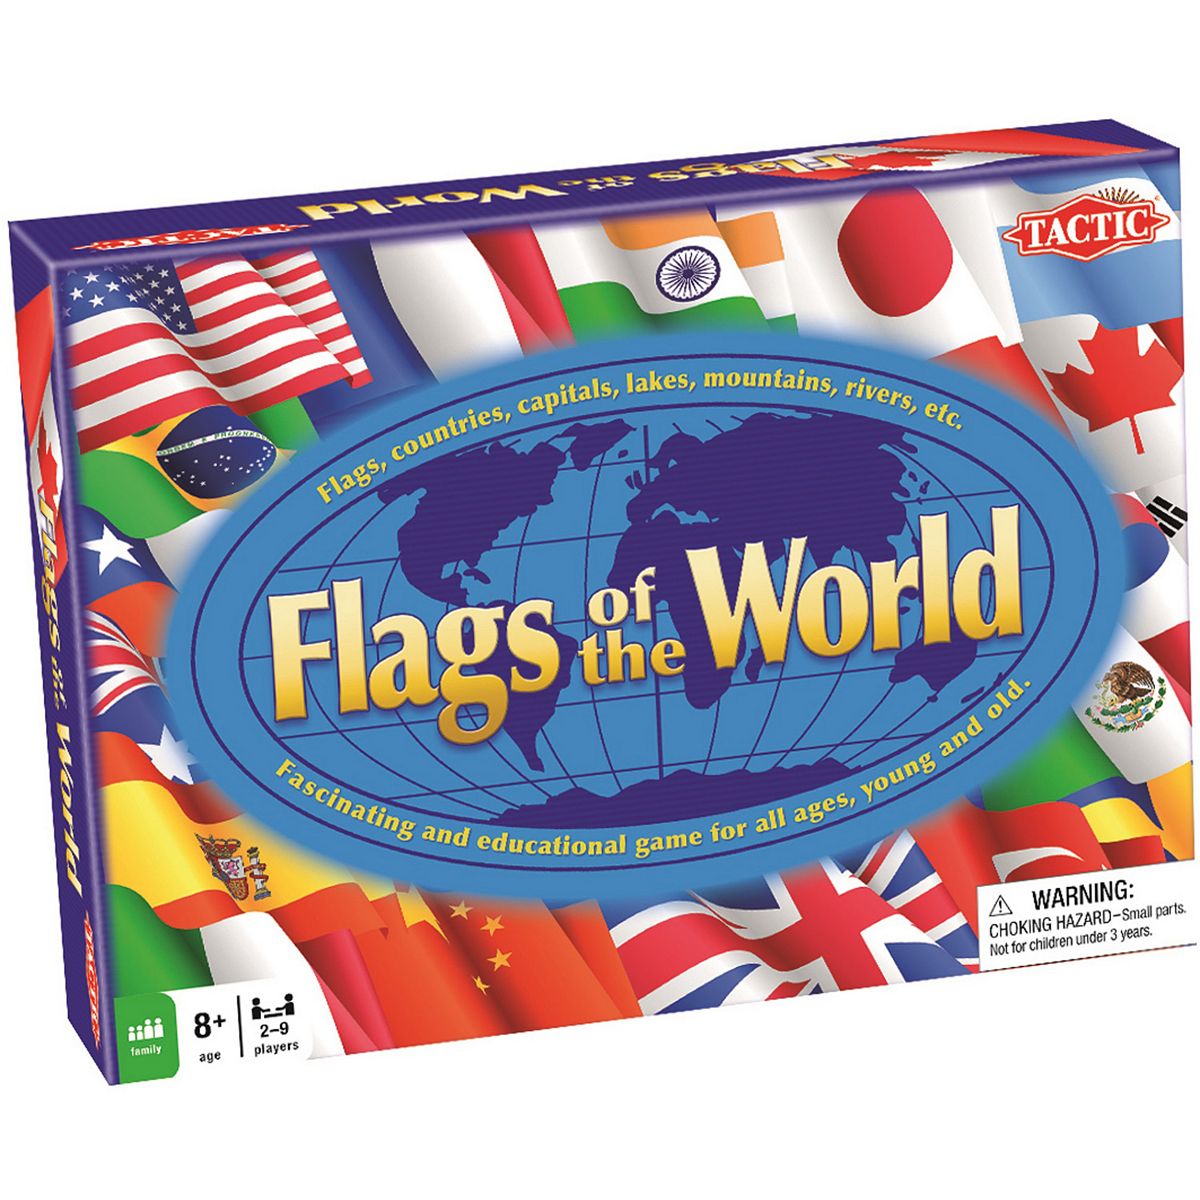  Tactic Flags of The World Family Card Game - Educational & Fun  - Play & Learn About Flags, Nations & Geography : Toys & Games